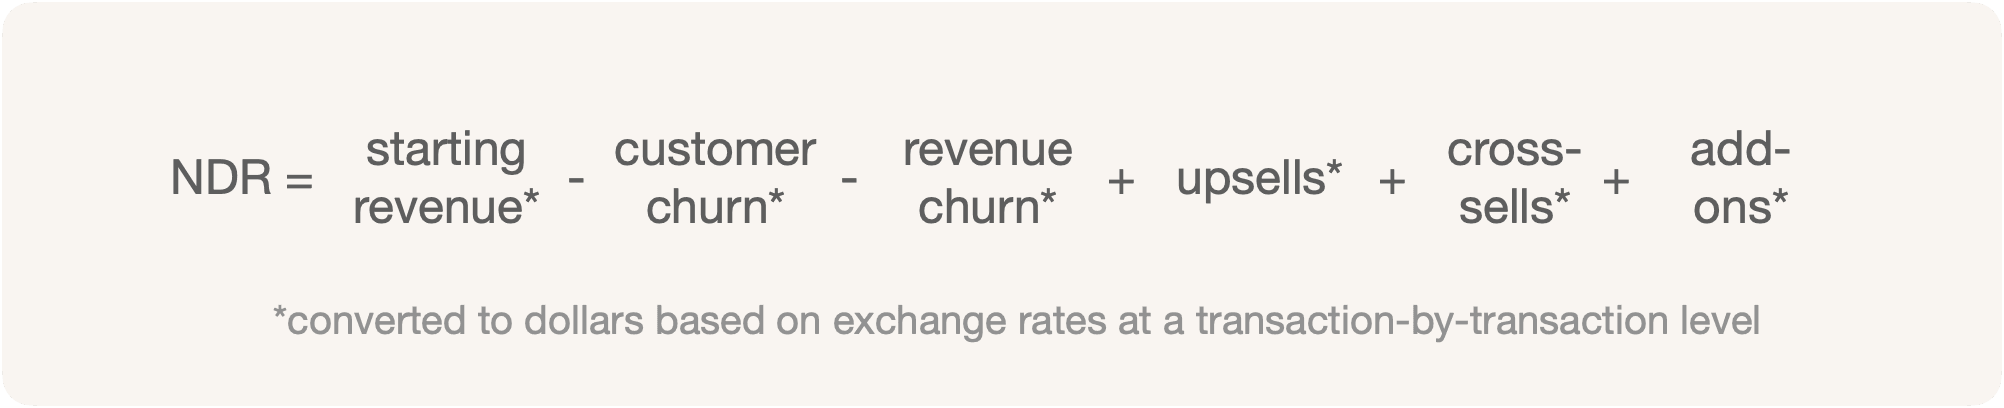 Net Dollar Retention is starting revenue minus all churn plus all expansion revenue for a period, with all values converted to dollars to accommodate currency translation and exchange rates.